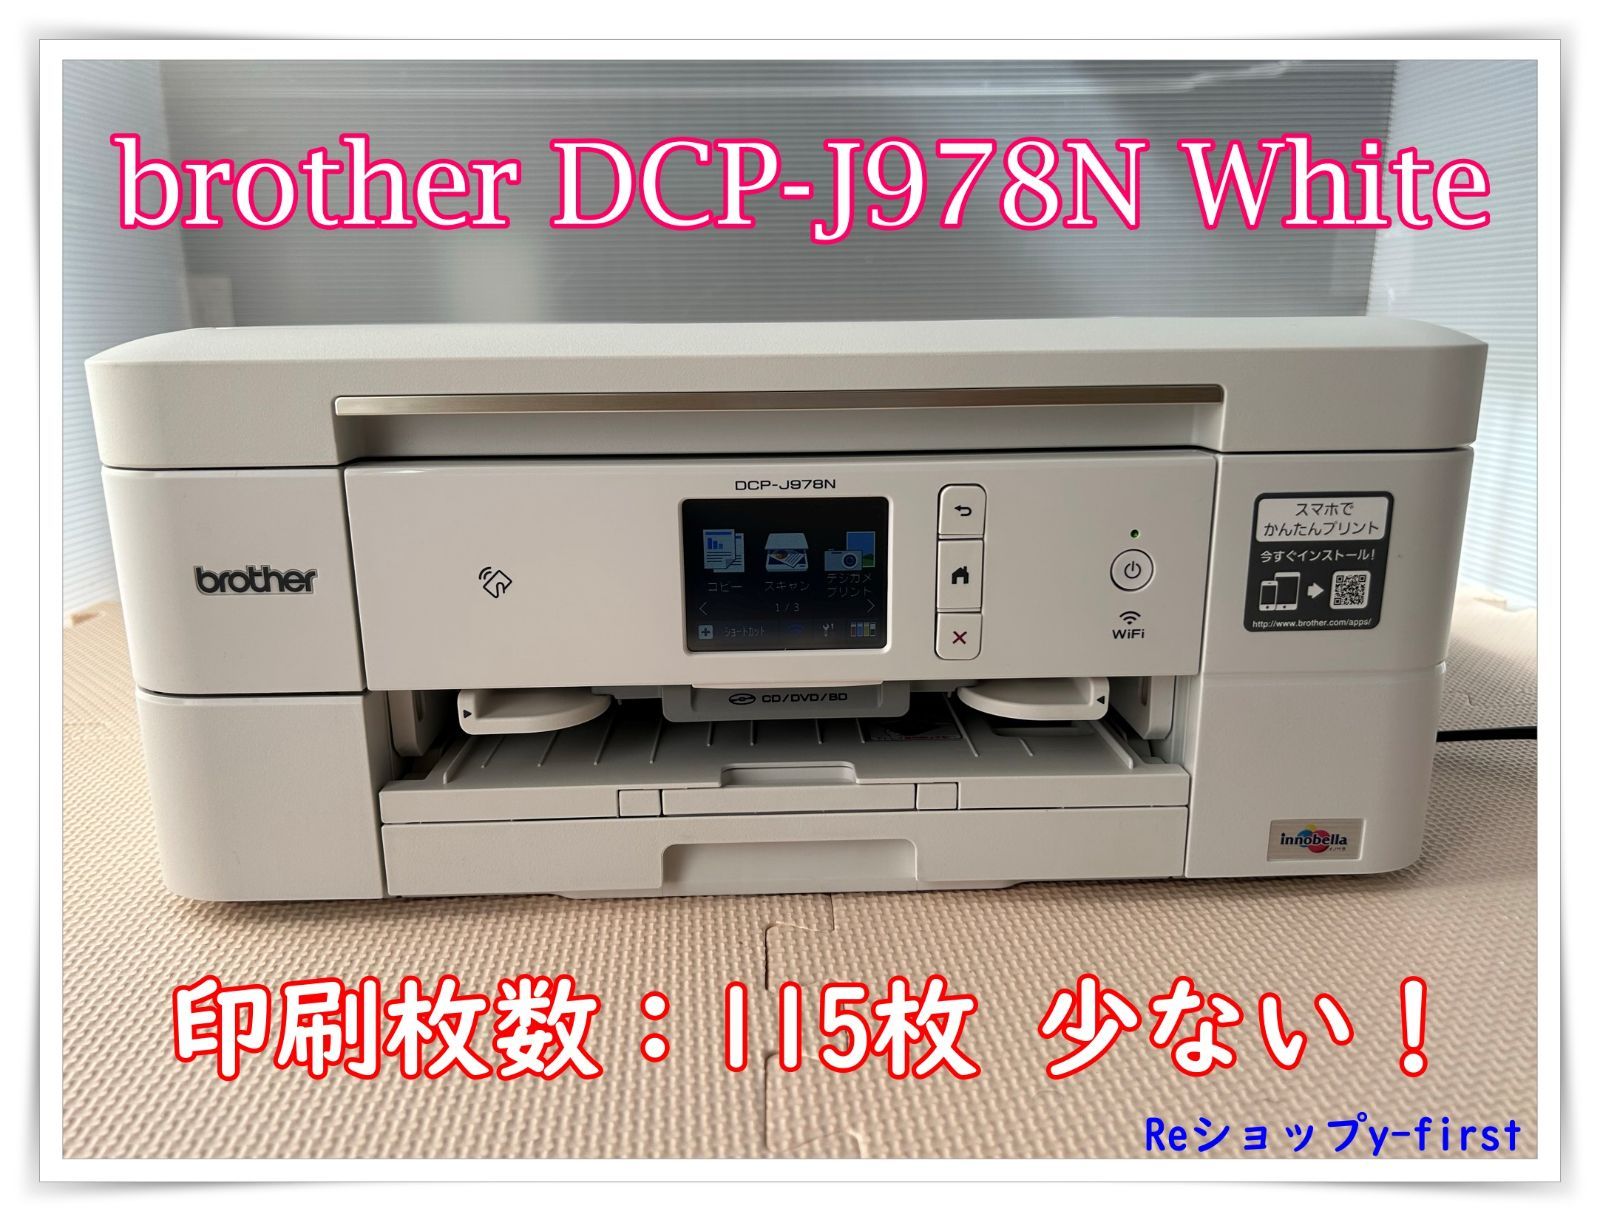 M94021 brotherブラザー プリンター DCP-J978N 白 - Reショップy-first